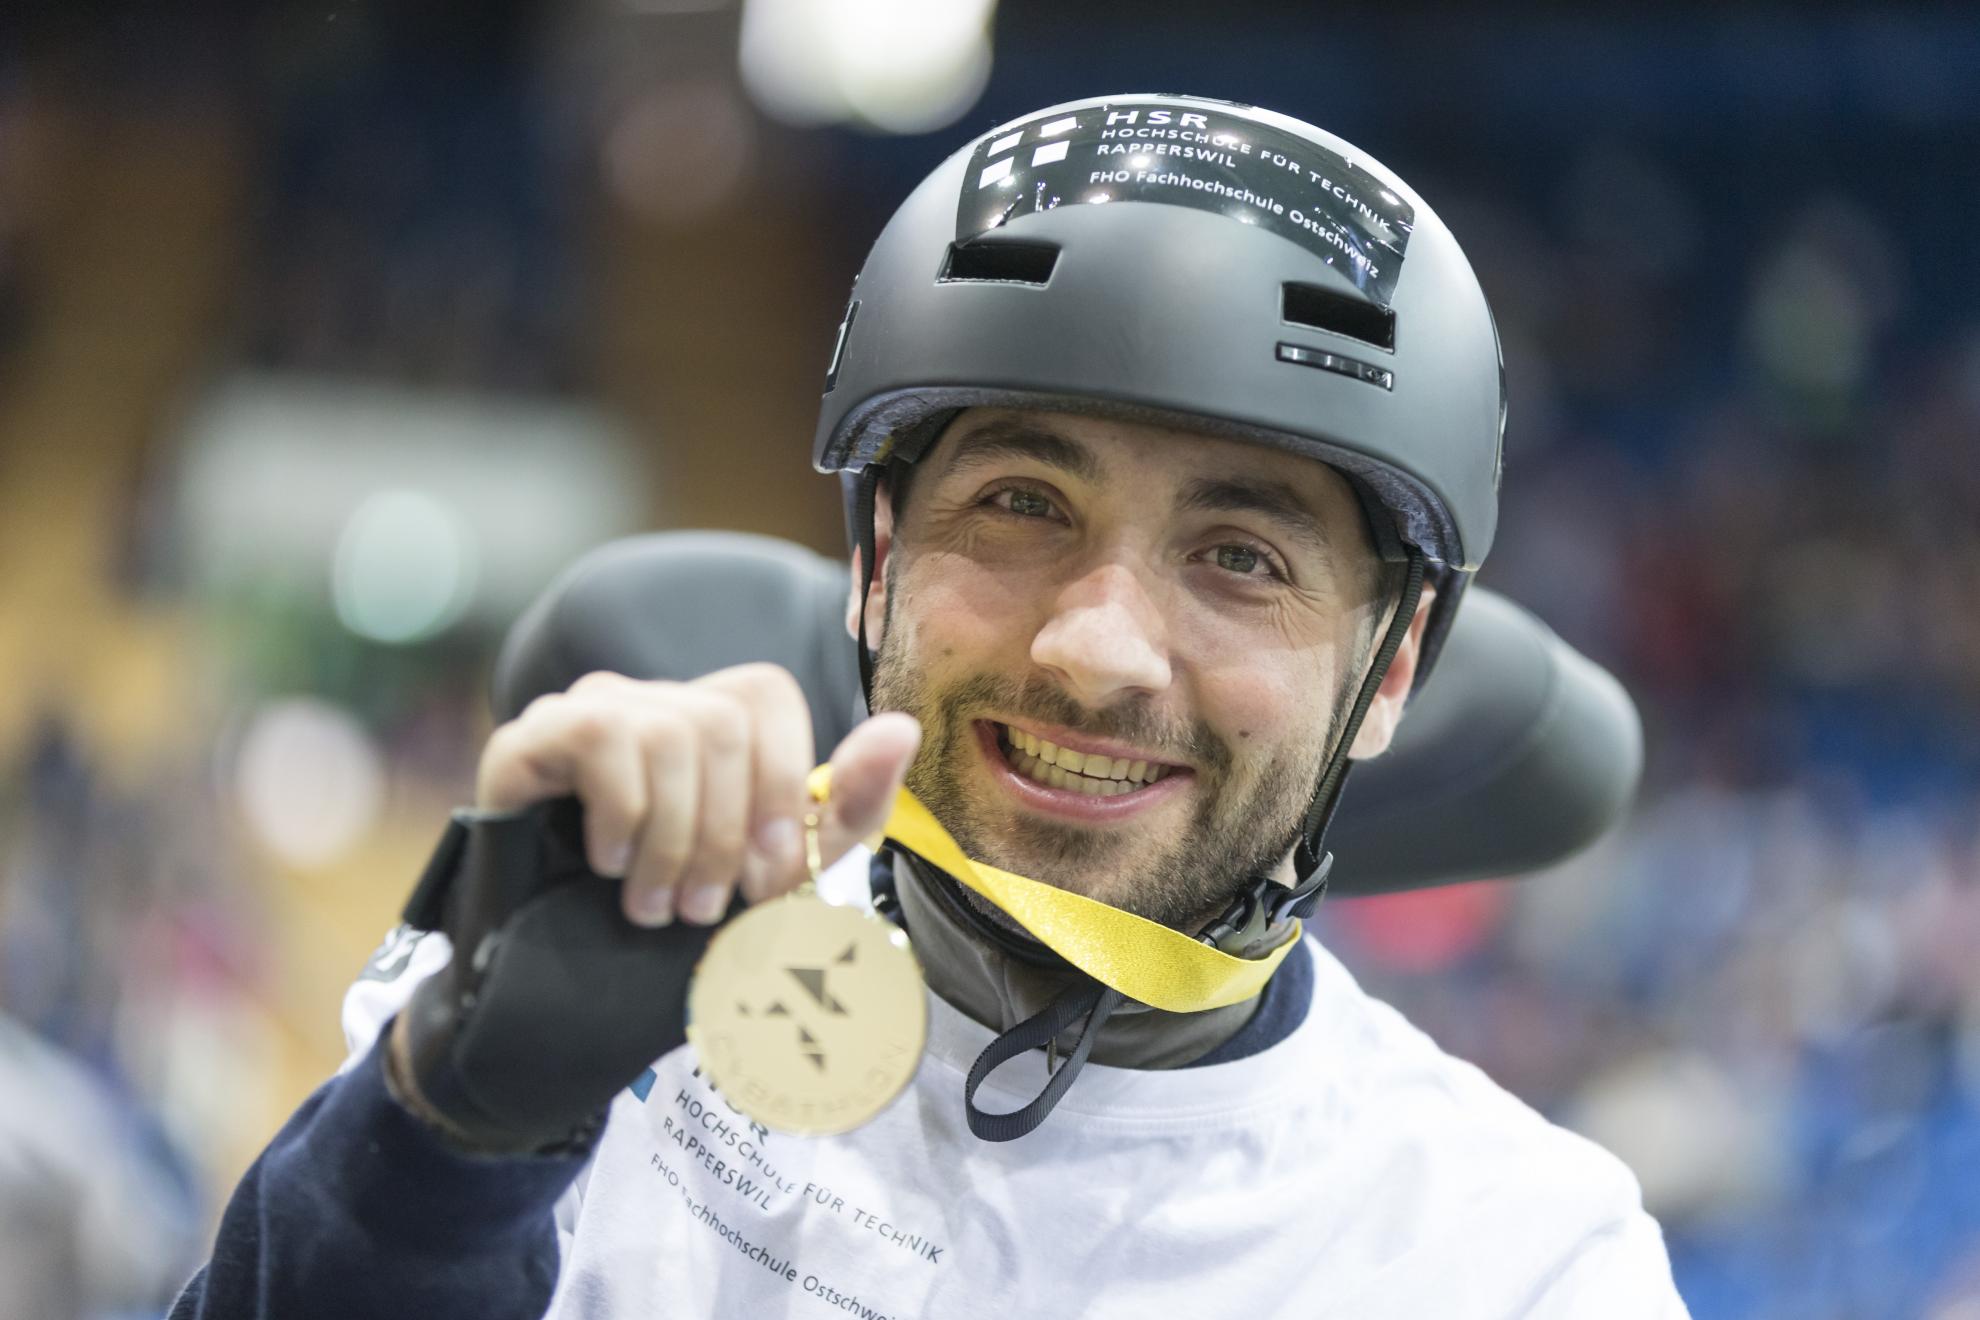 Pilot: Florian Hauser from the Swiss team HSR enhanced (OST and ETH Zurich), winner of the Powered Wheelchair Race in 2016 and competing again in 2020 in the same constellation. 